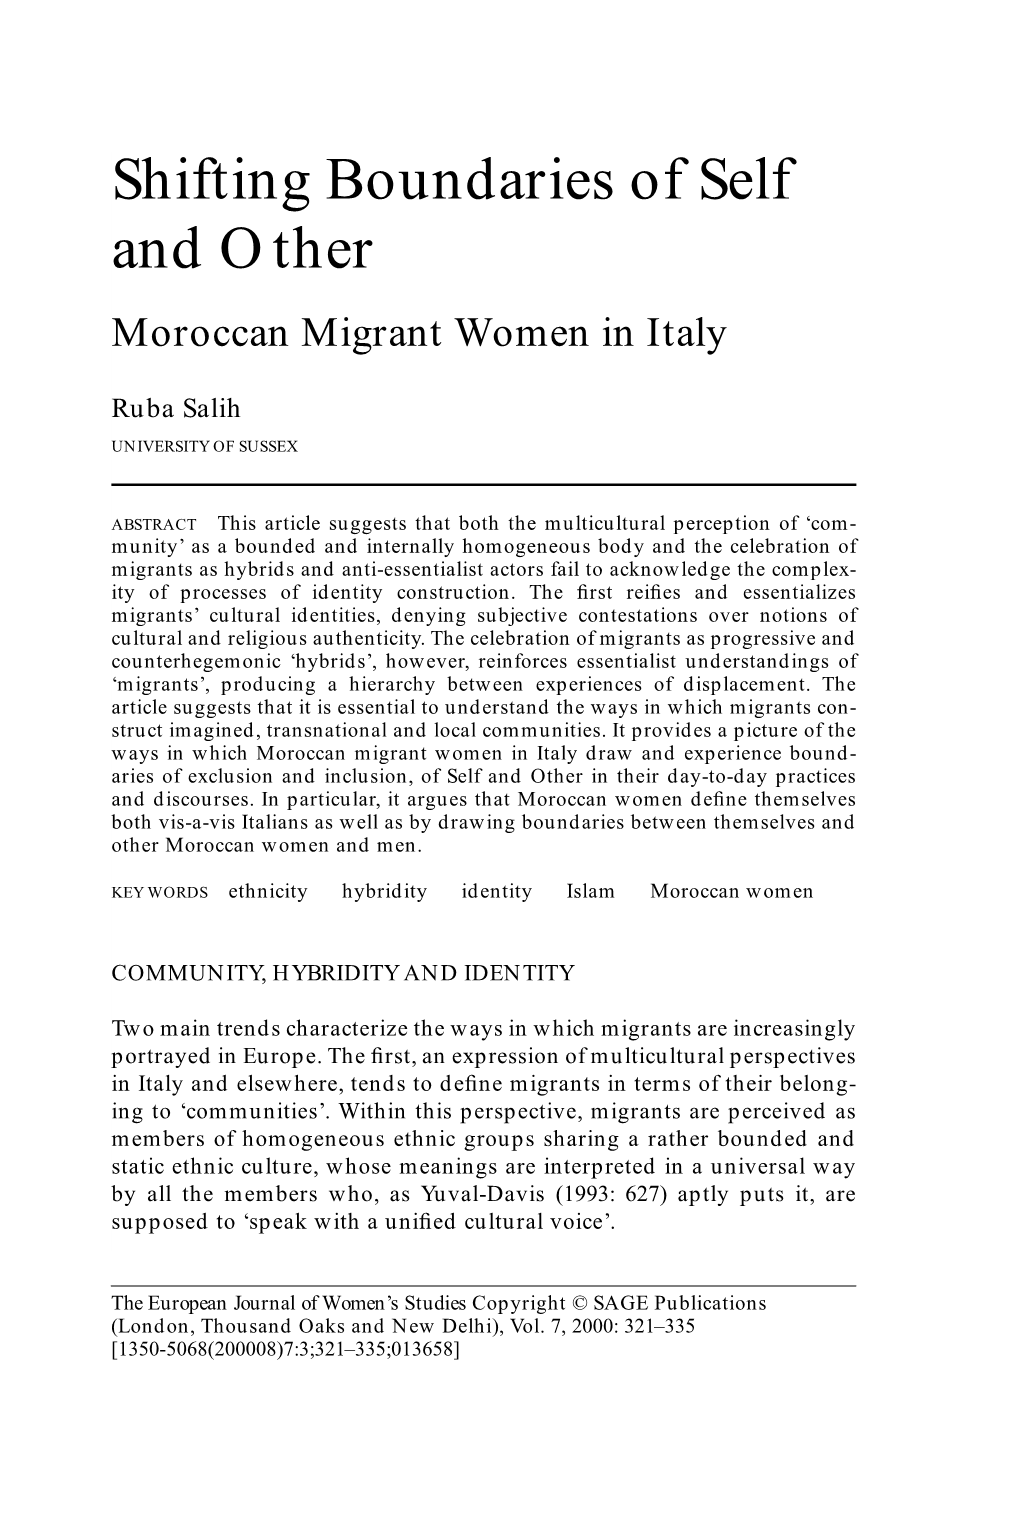 Shifting Boundaries of Self and Other: Moroccan Migrant Women in Italy